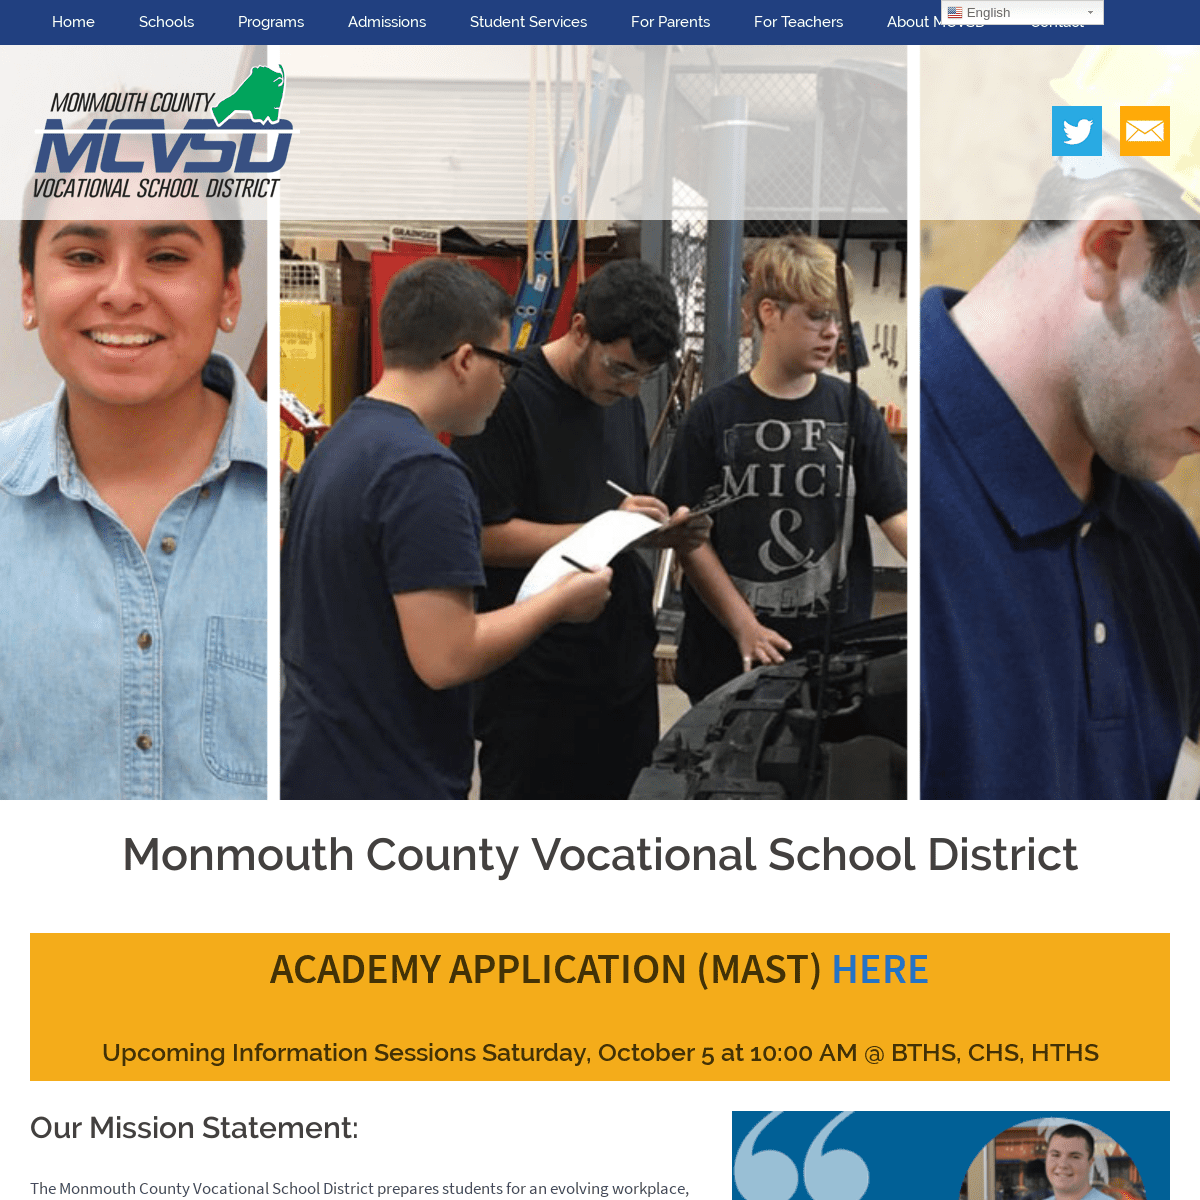 Monmouth County Vocational School District – MCVSD